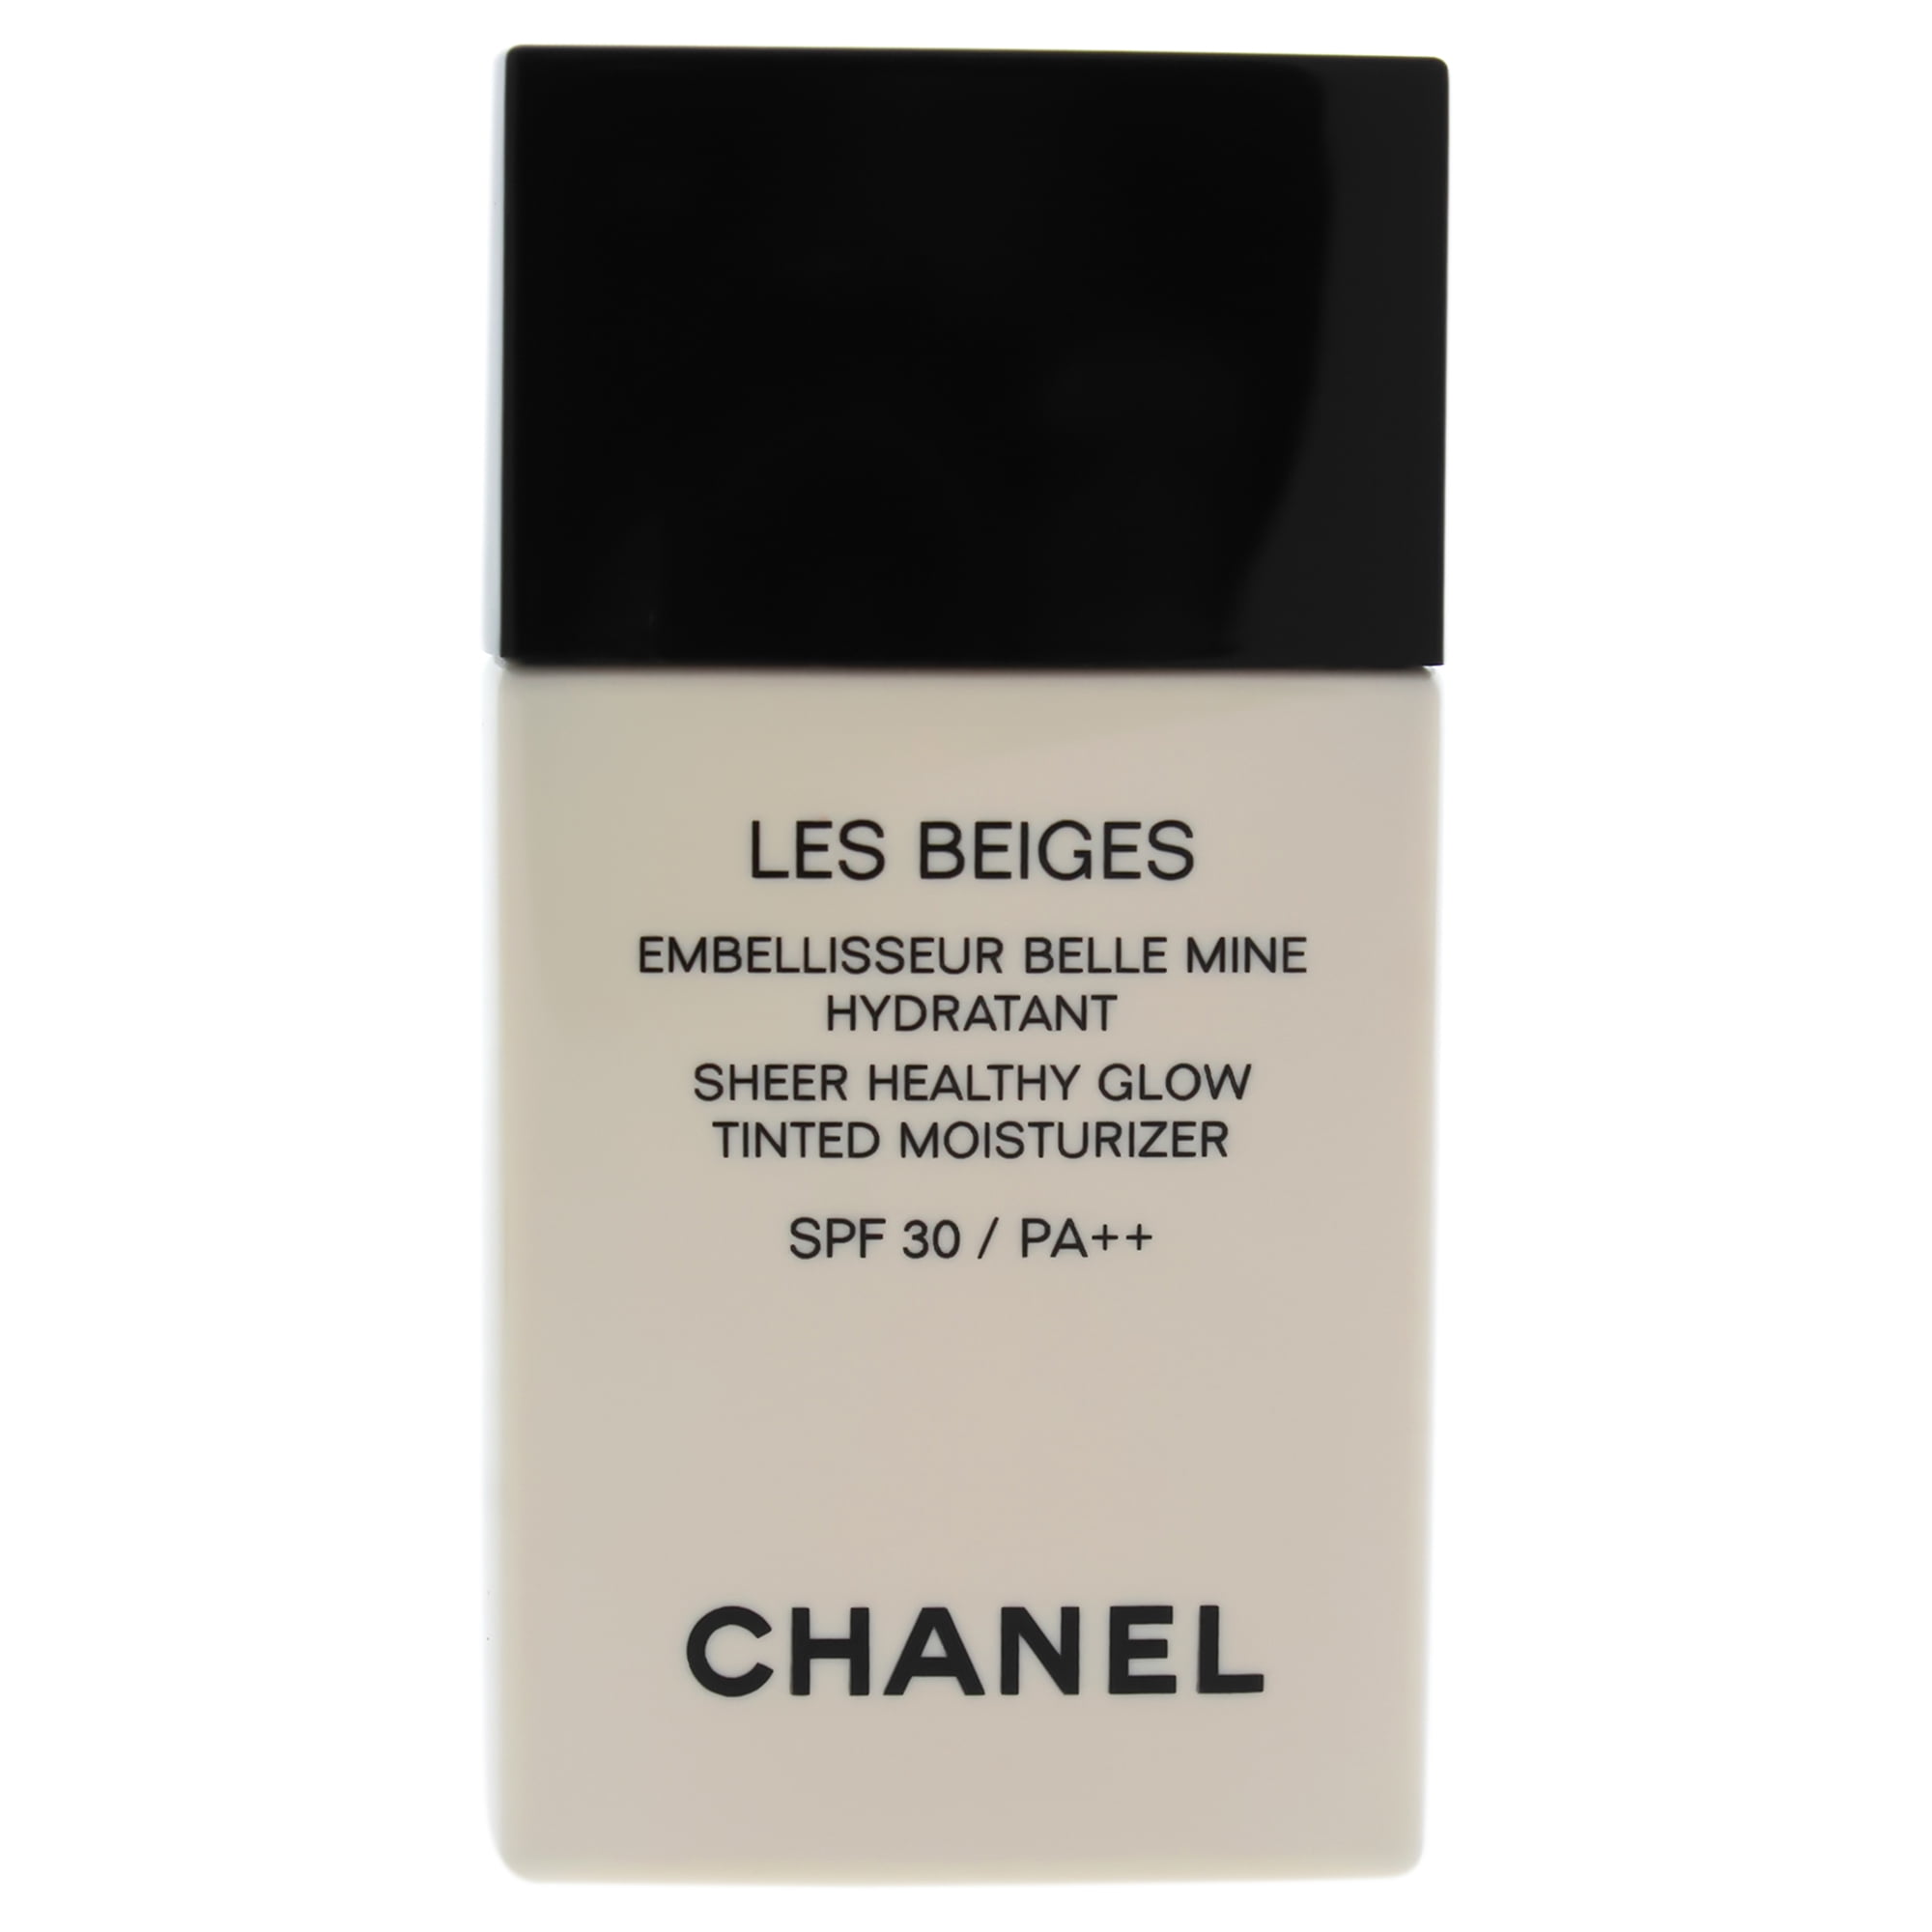 Les Beiges Sheer Healthy Glow Tinted Moisturizing SPF 30 - Medium Plus by  Chanel for Women - 1 oz M 